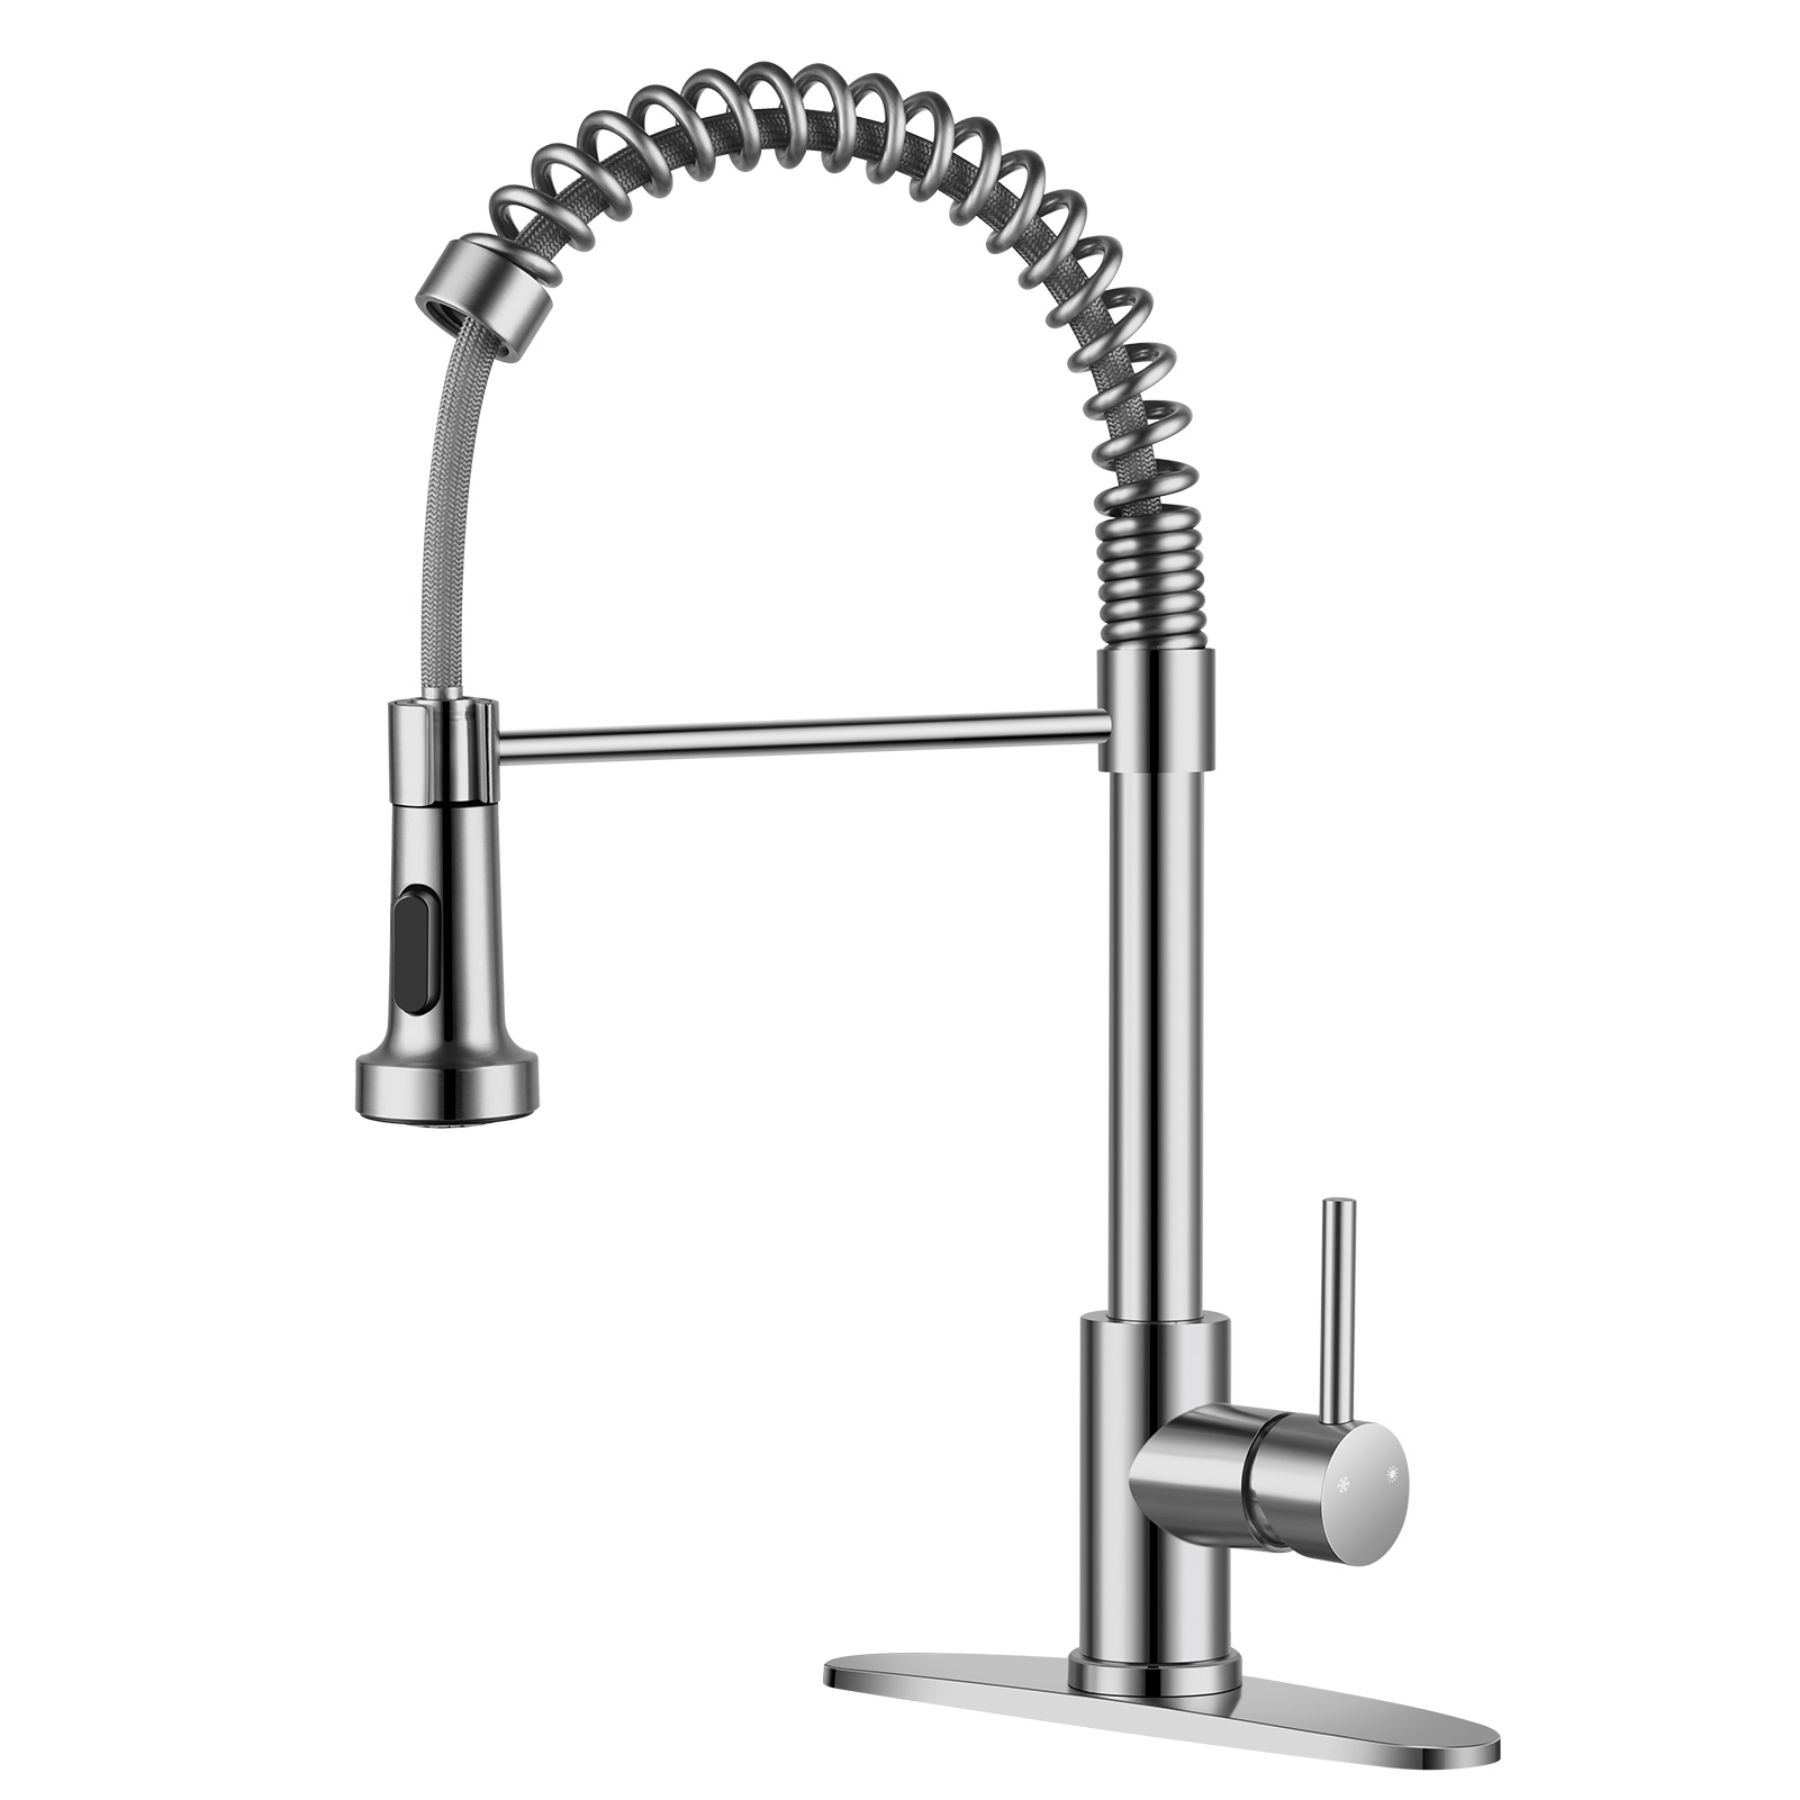 Single Handle Pull-Down Kitchen Faucet